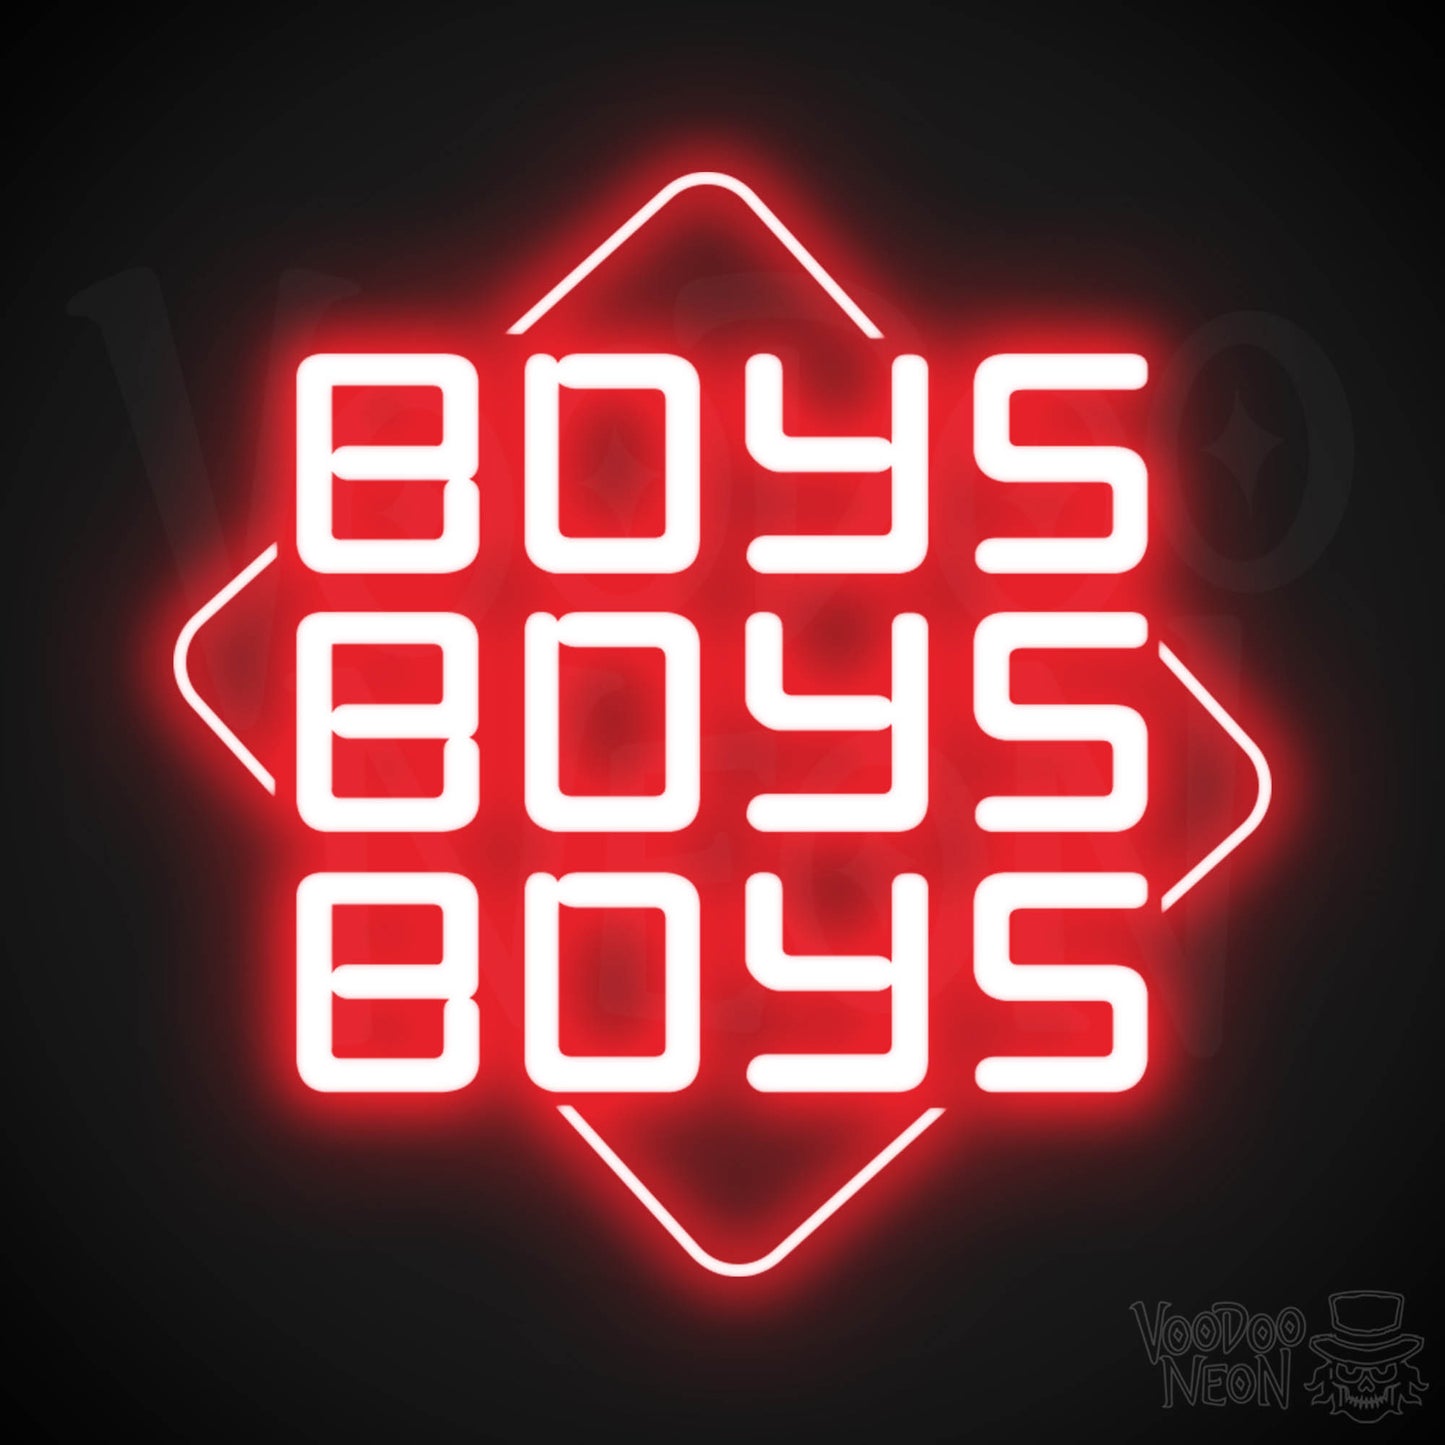 Boys Boys Boys Neon Sign - Neon Boys Boys Boys Sign - Neon Wall Art - Color Red